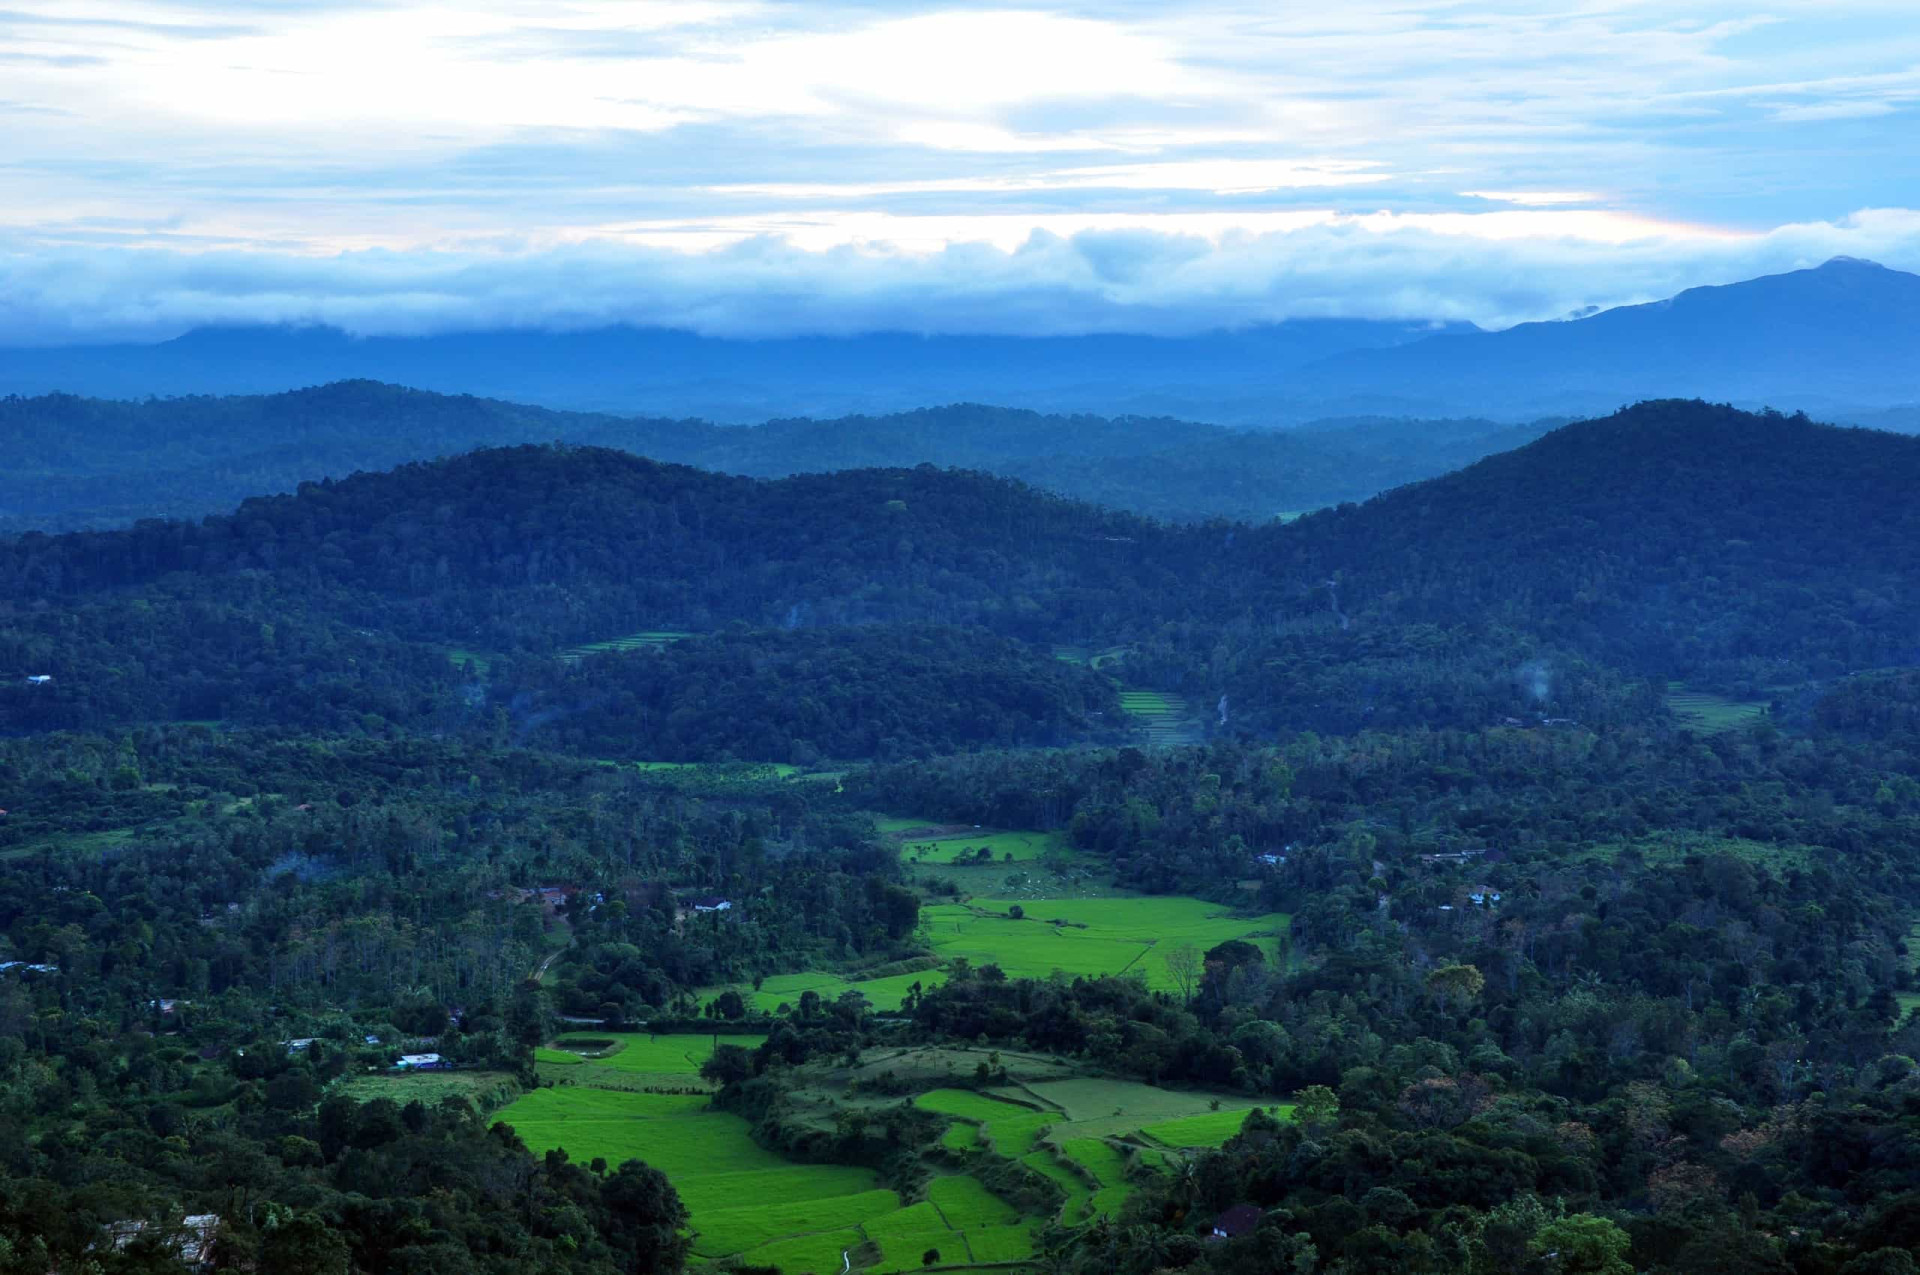 <p>Lying 1,525 m (5,003 ft) above sea level in the Western Ghats in Karnataka state and also known as Kodagu, Coorg has sometimes been described as the "Scotland of the East" for its magnificent emerald-colored landscape and rolling, forested hills.</p>